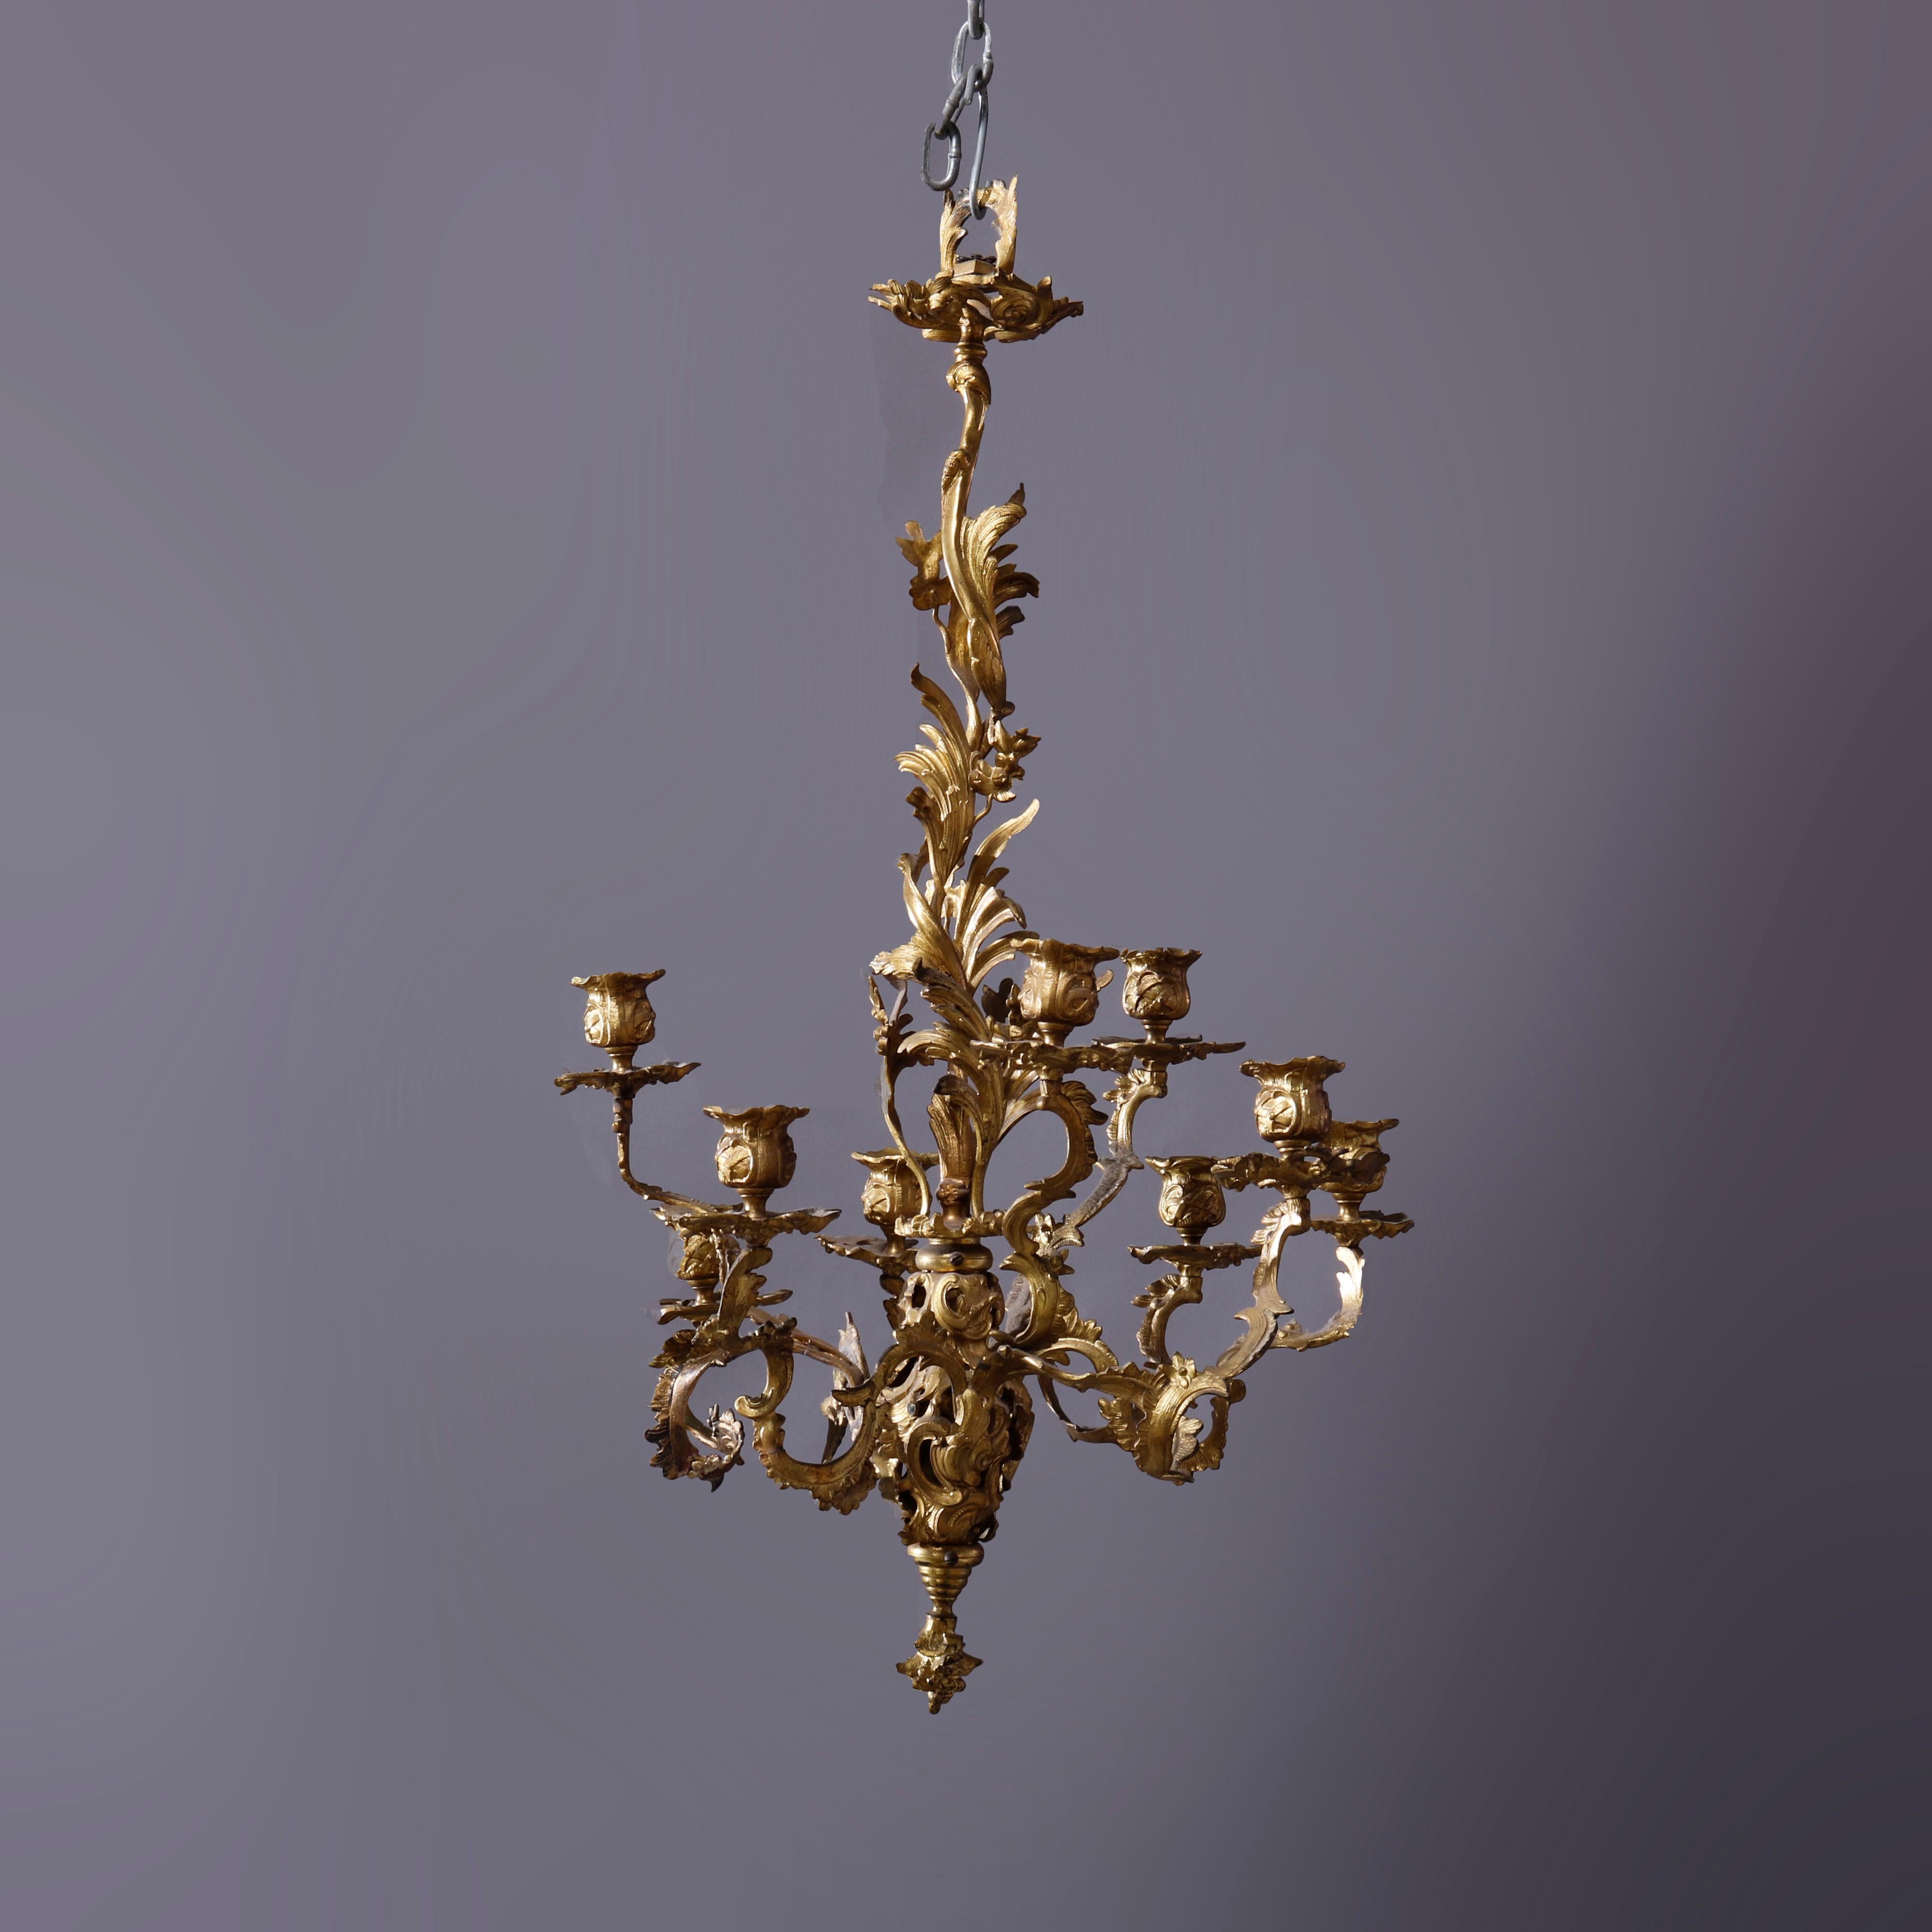 An antique French Louis XIV into Rococo hanging candelabra chandelier offers cast gilt bronze frame in the form of scrolled foliate elements with acanthus arms terminating in candle sockets, c1890

Measures - 28''H x 13.5''W x 13.5''D.